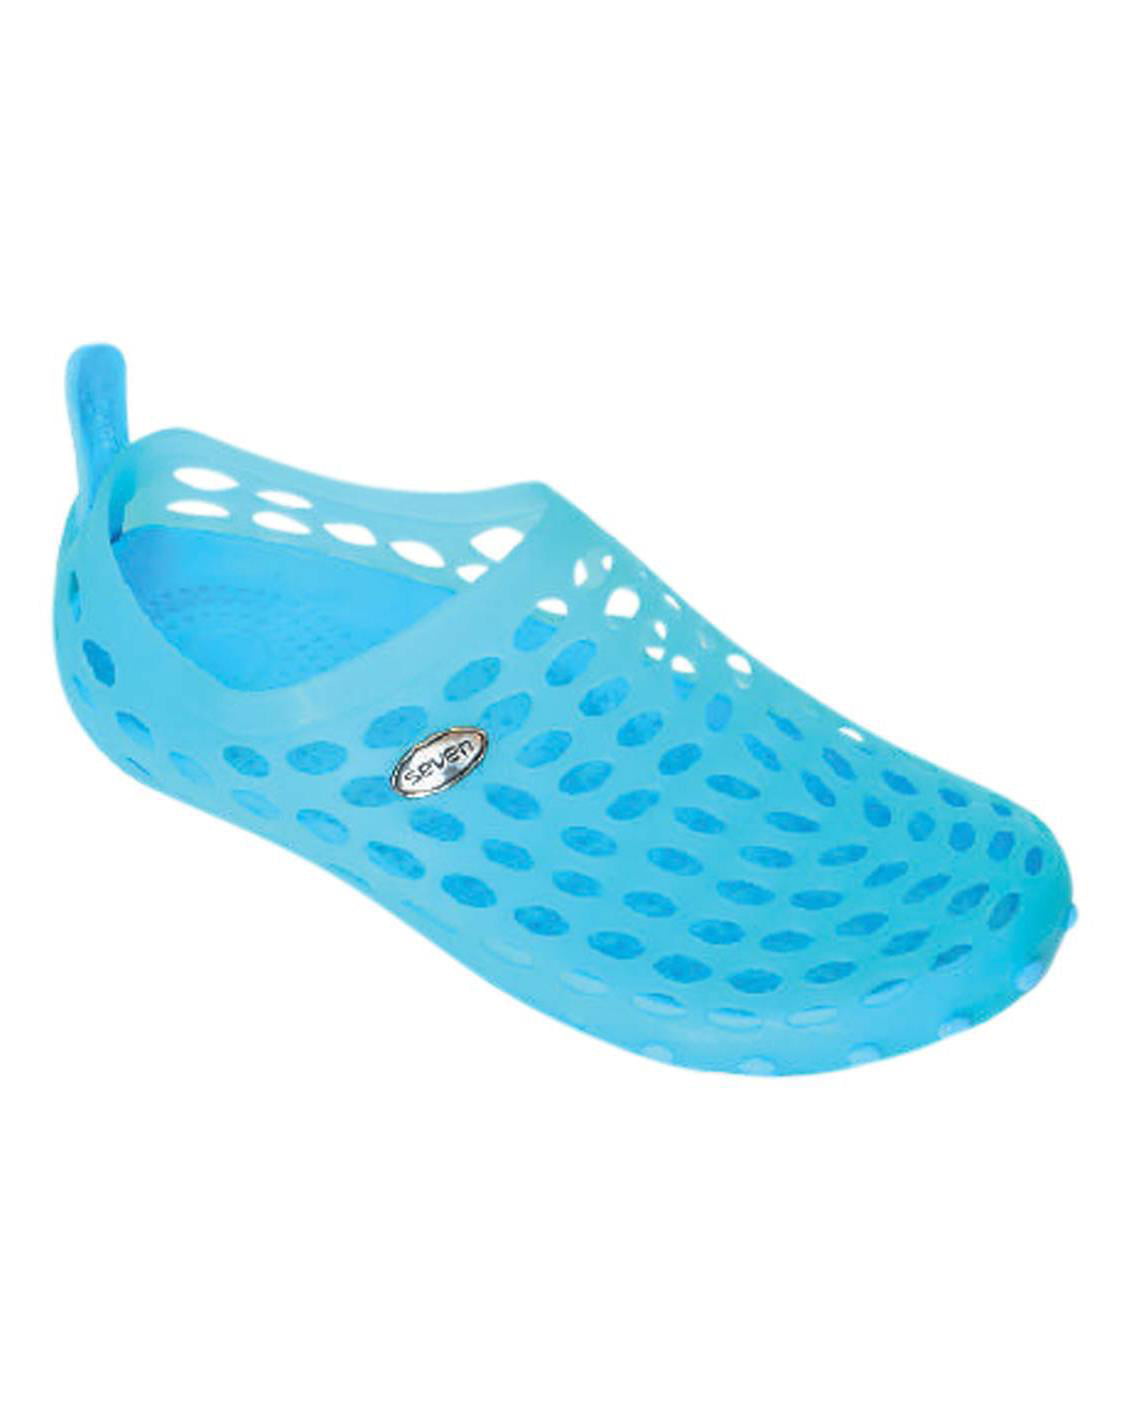 S7 Kids Water Shoes Breathable Slip-On Beach Sandals, Blue, Size: 2 ...